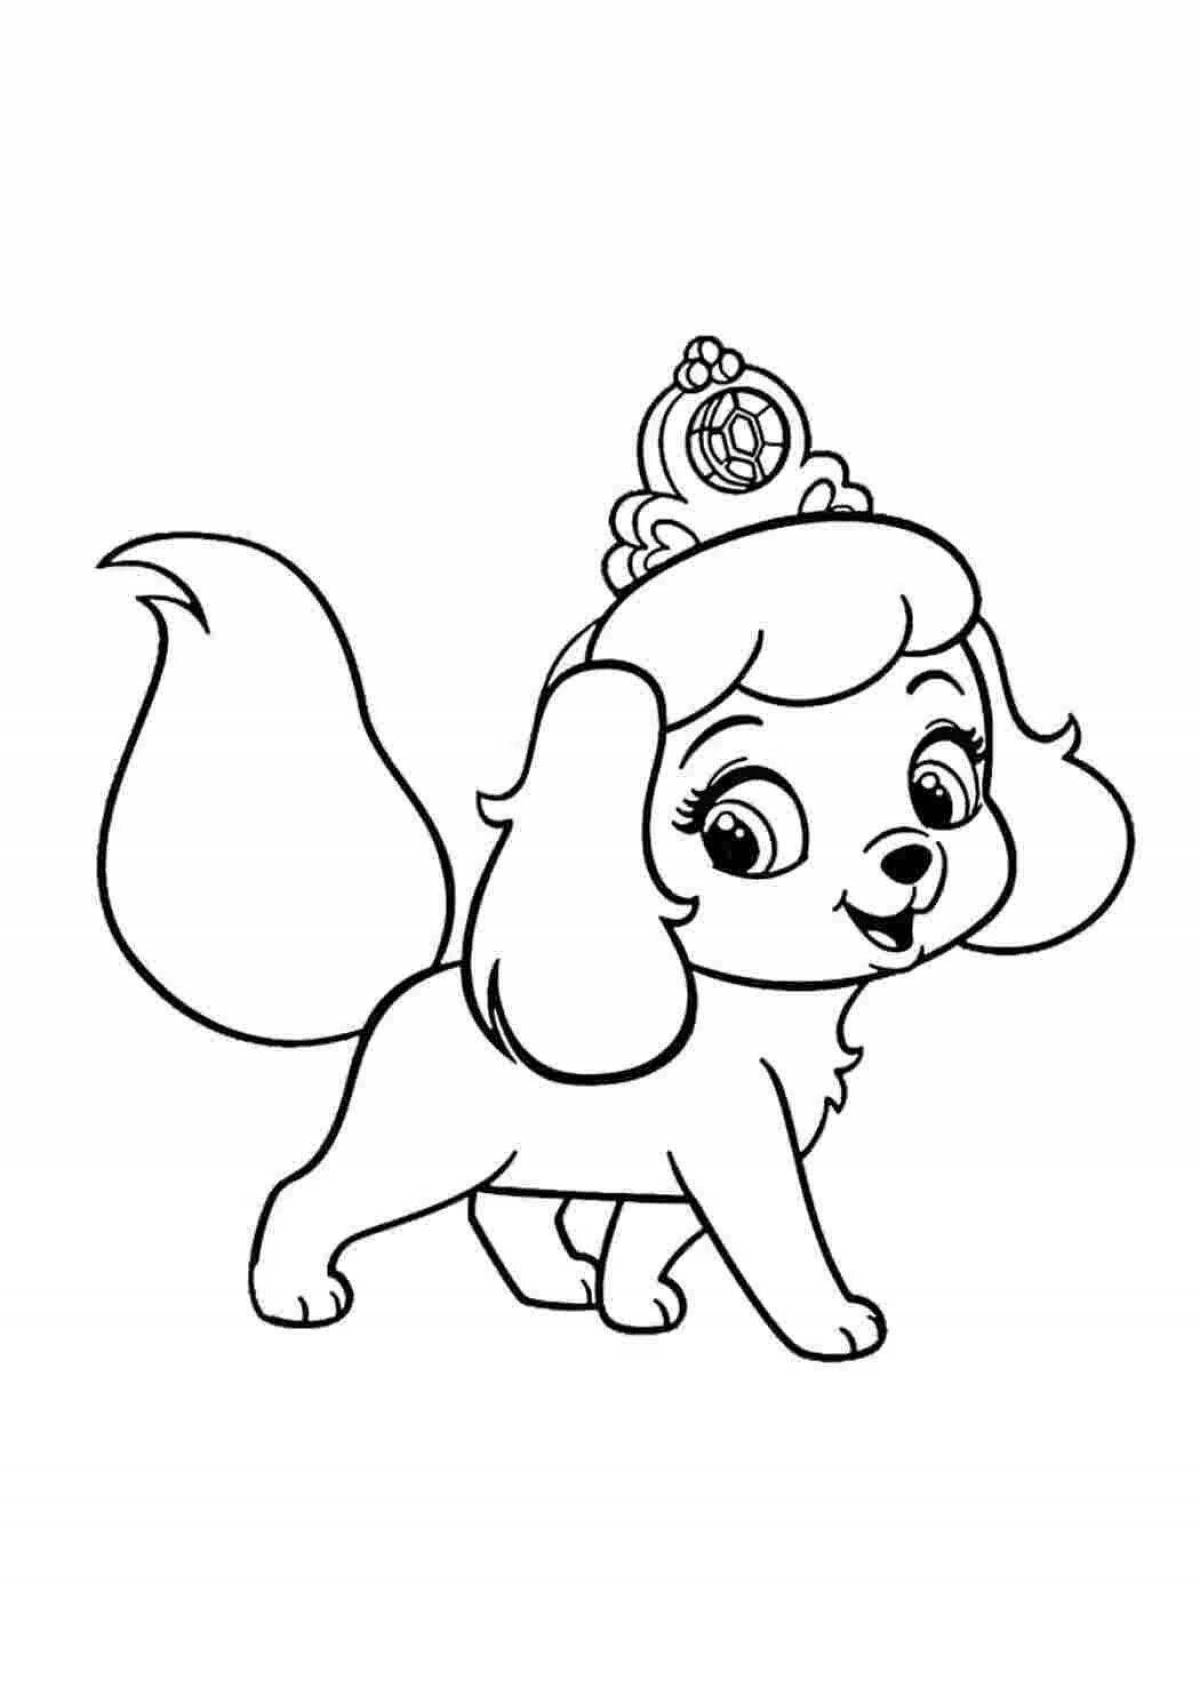 Sweet-nosed dog coloring page